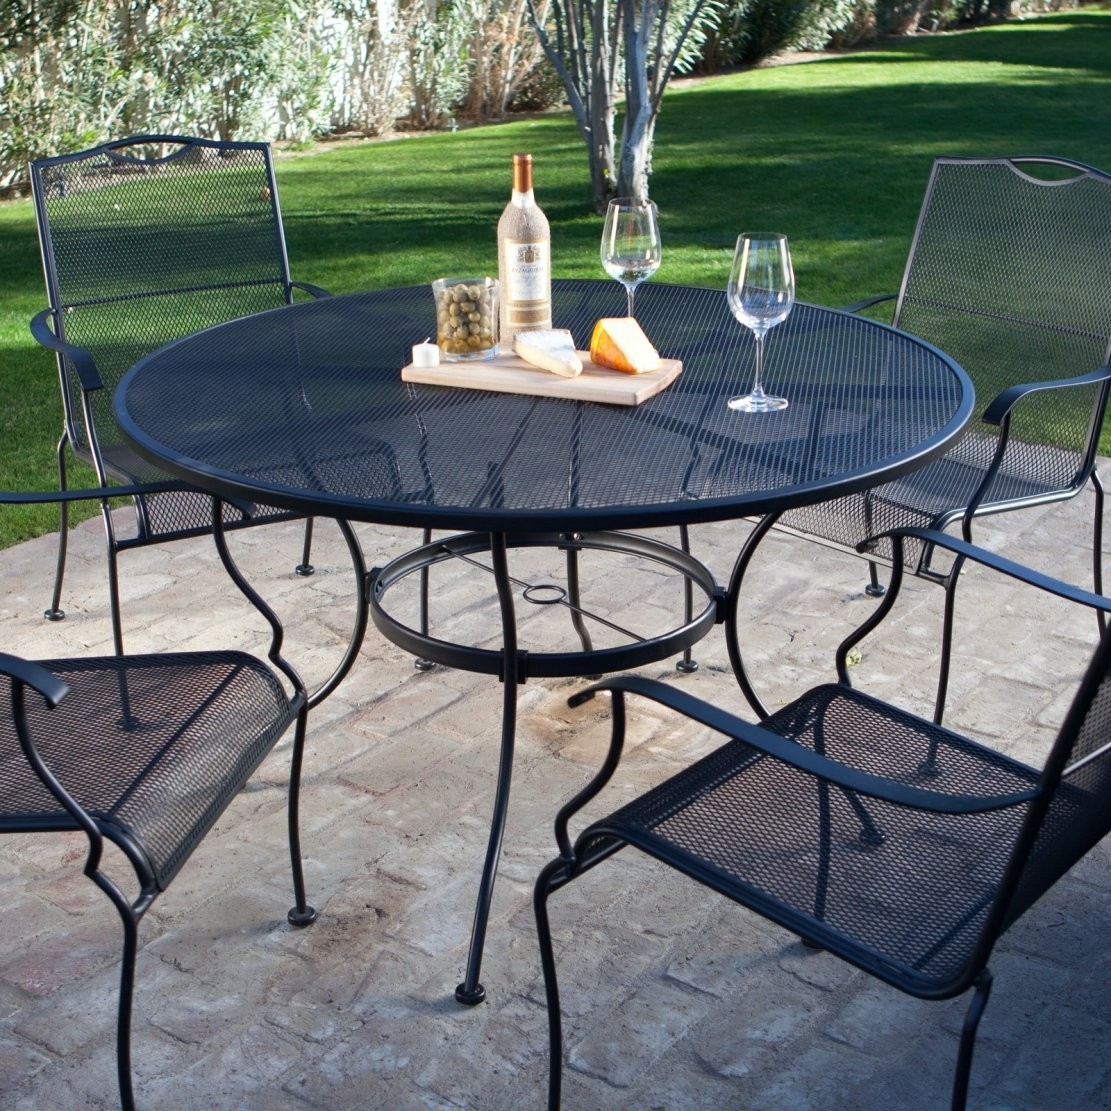 Wrought Iron Patio Furniture Sets Ideas On Foter